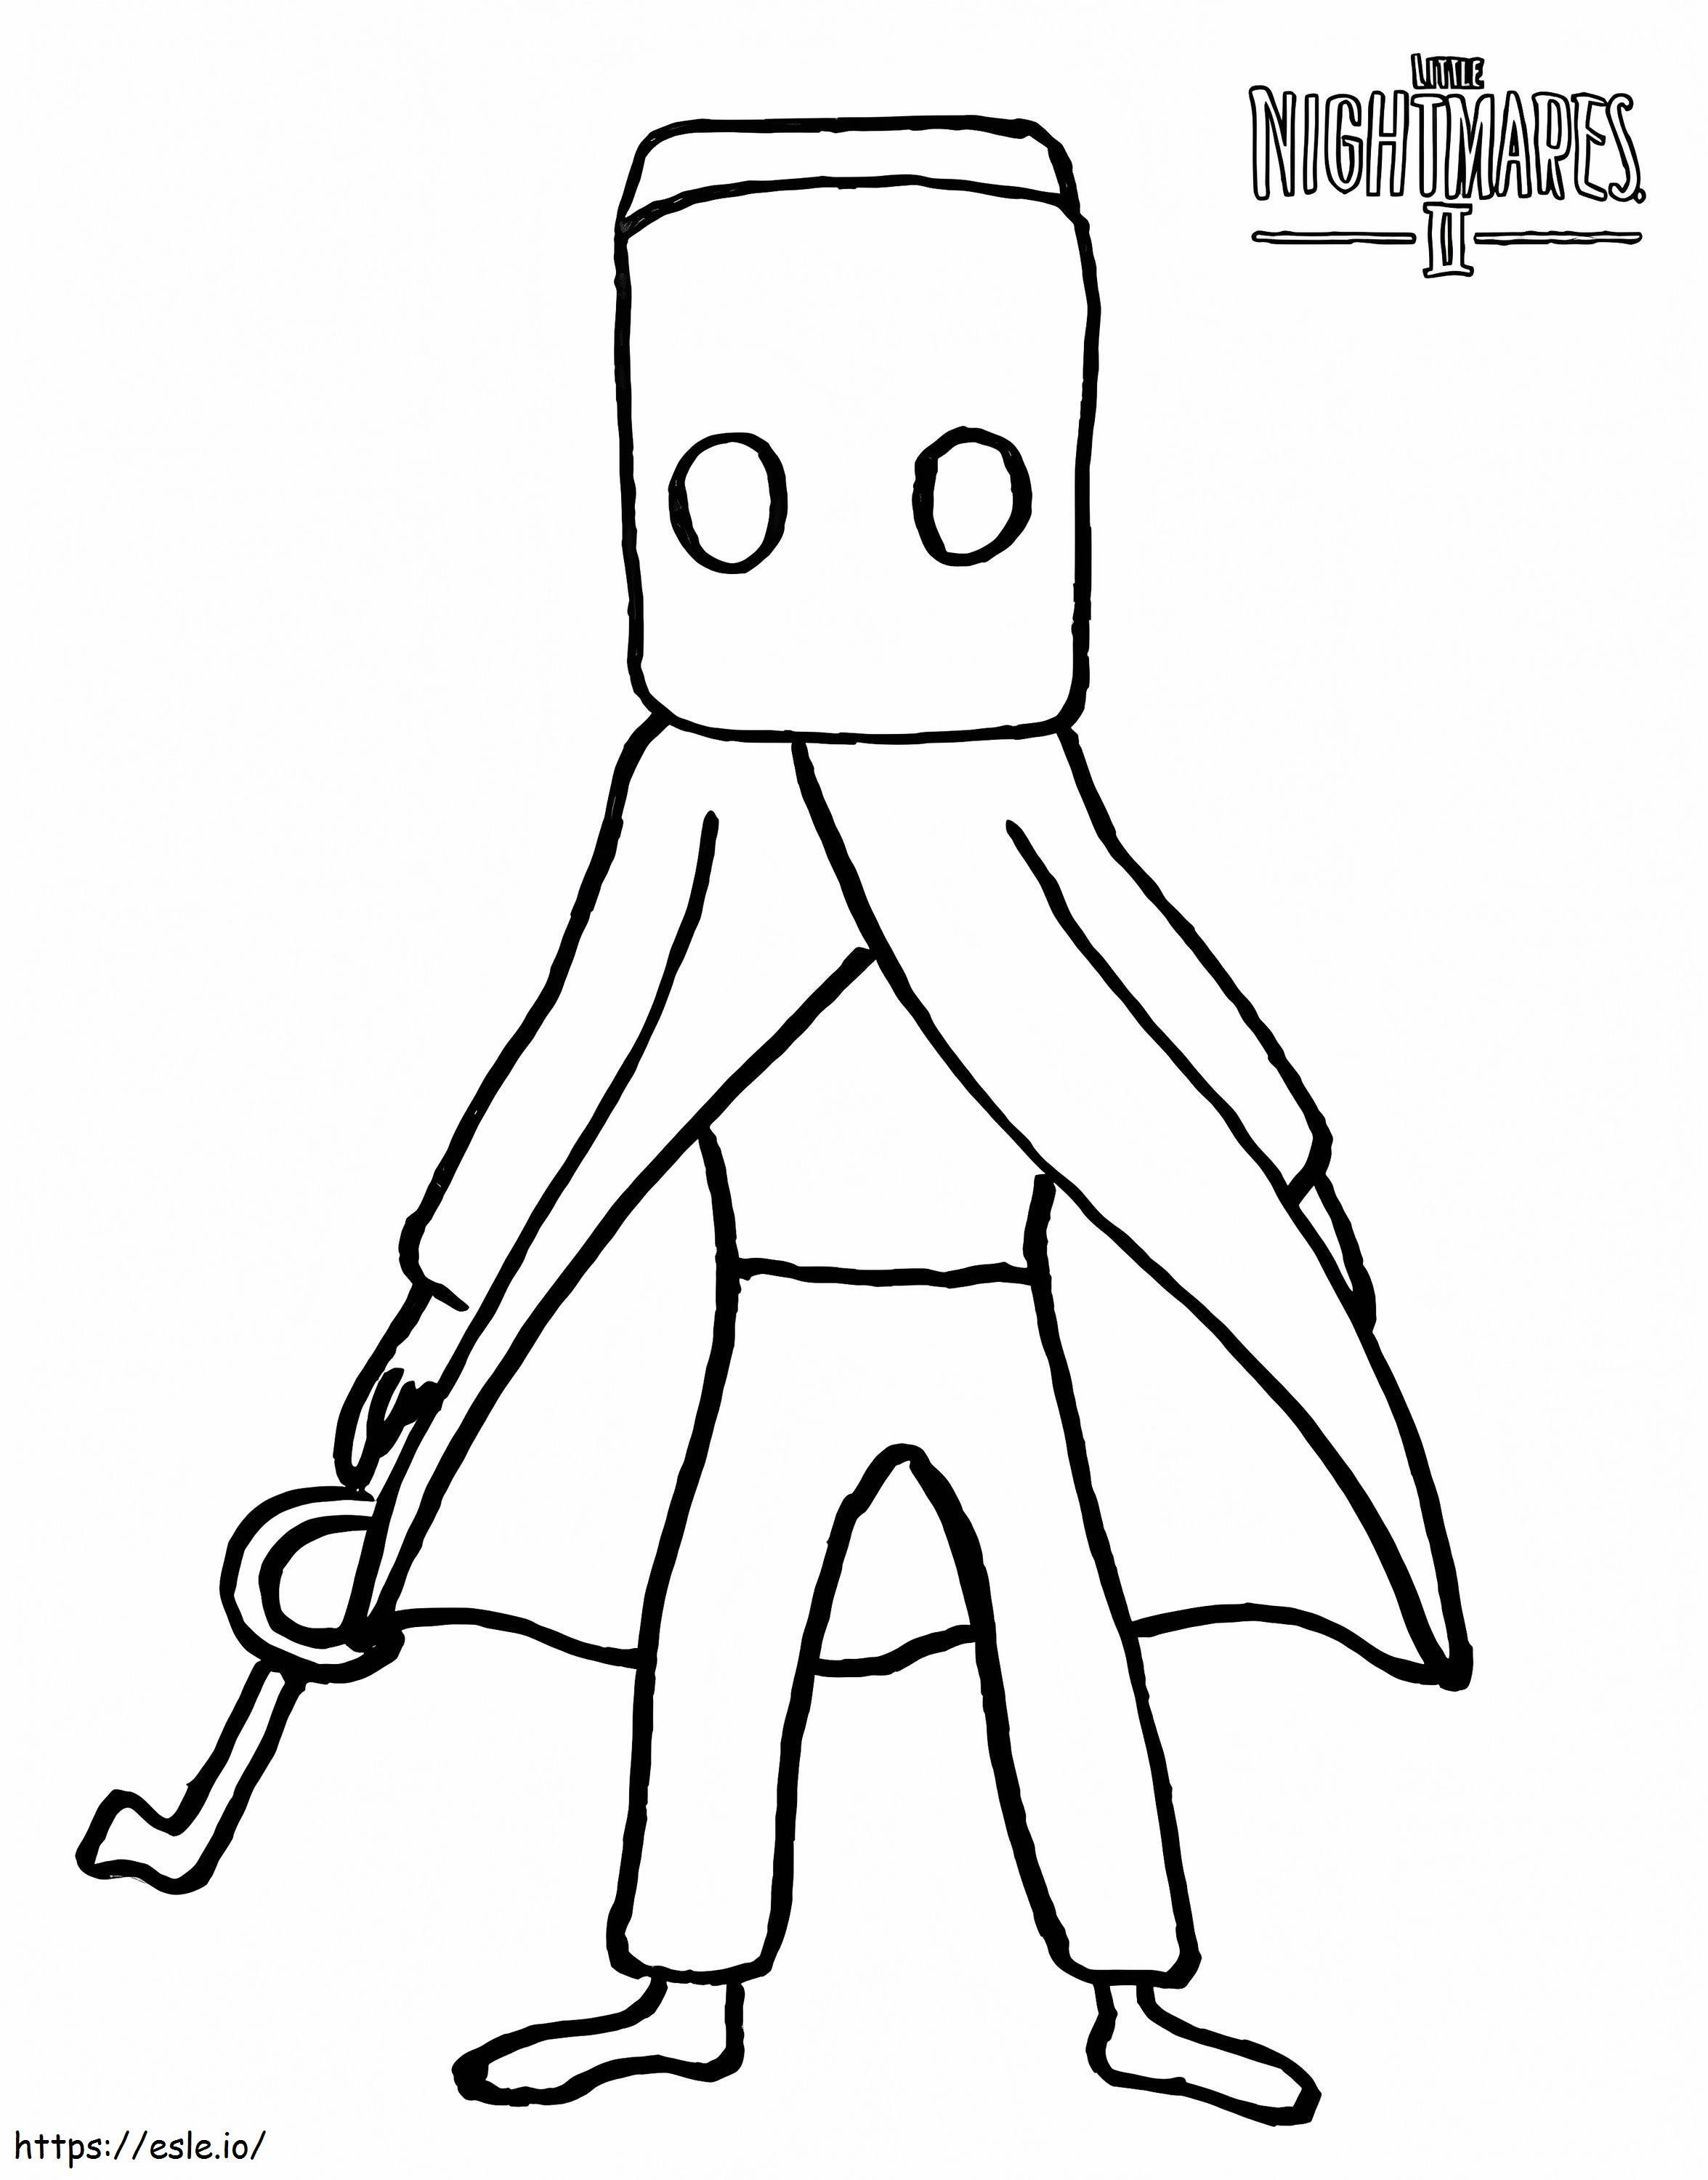 Mono From Little Nightmares coloring page